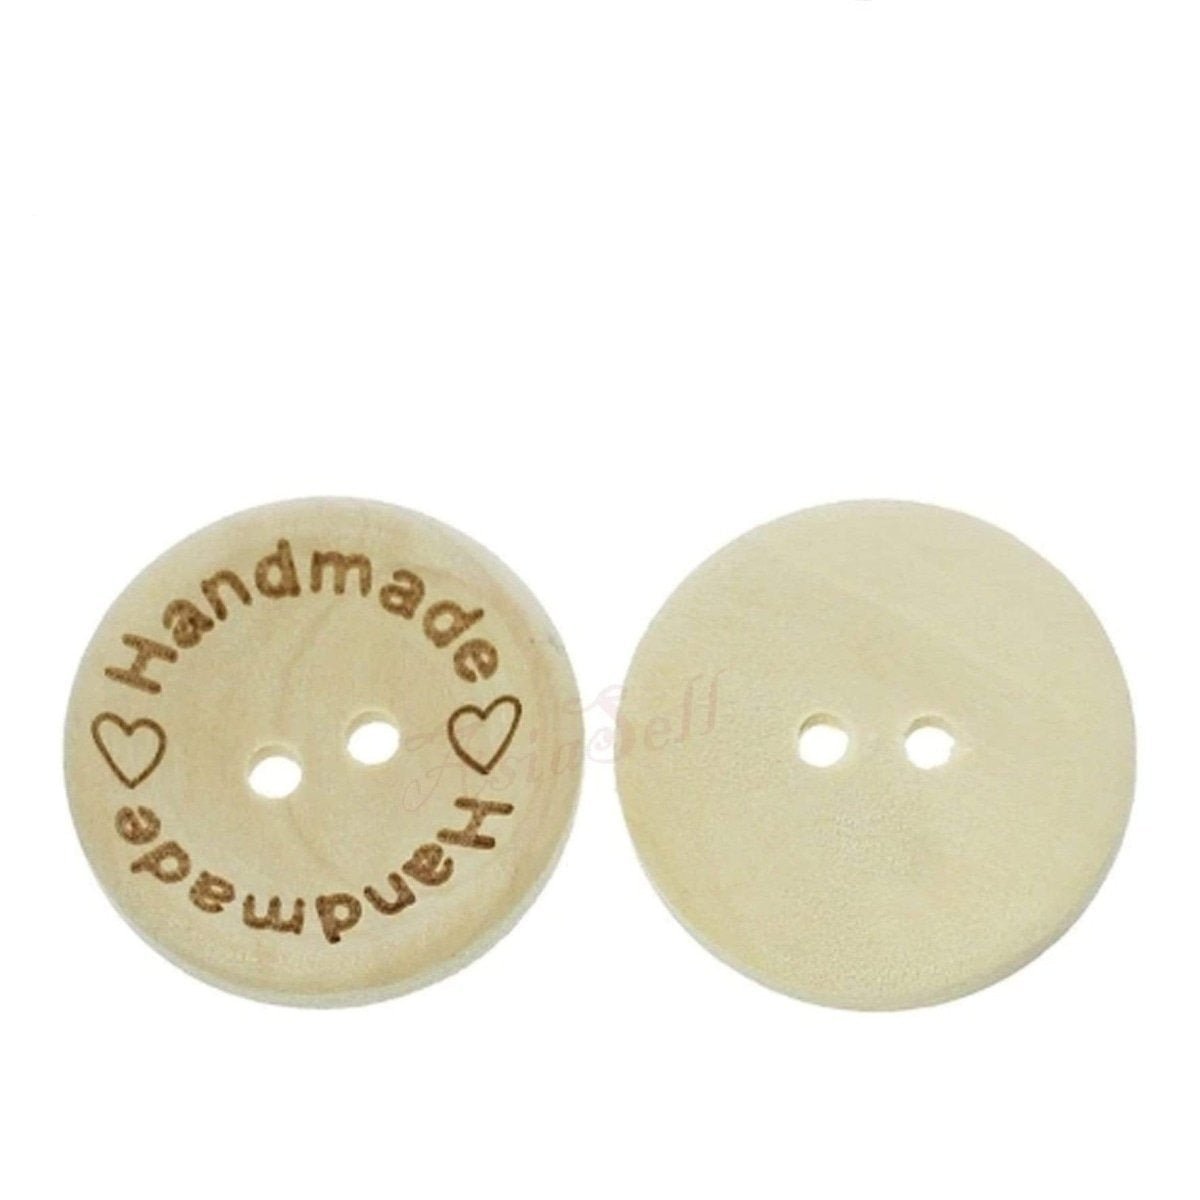 100pcs 2-Holes Handmade with Love Round Wooden Buttons Button Handmade Clothes - 20mm "Handmade Handmade" - - Asia Sell